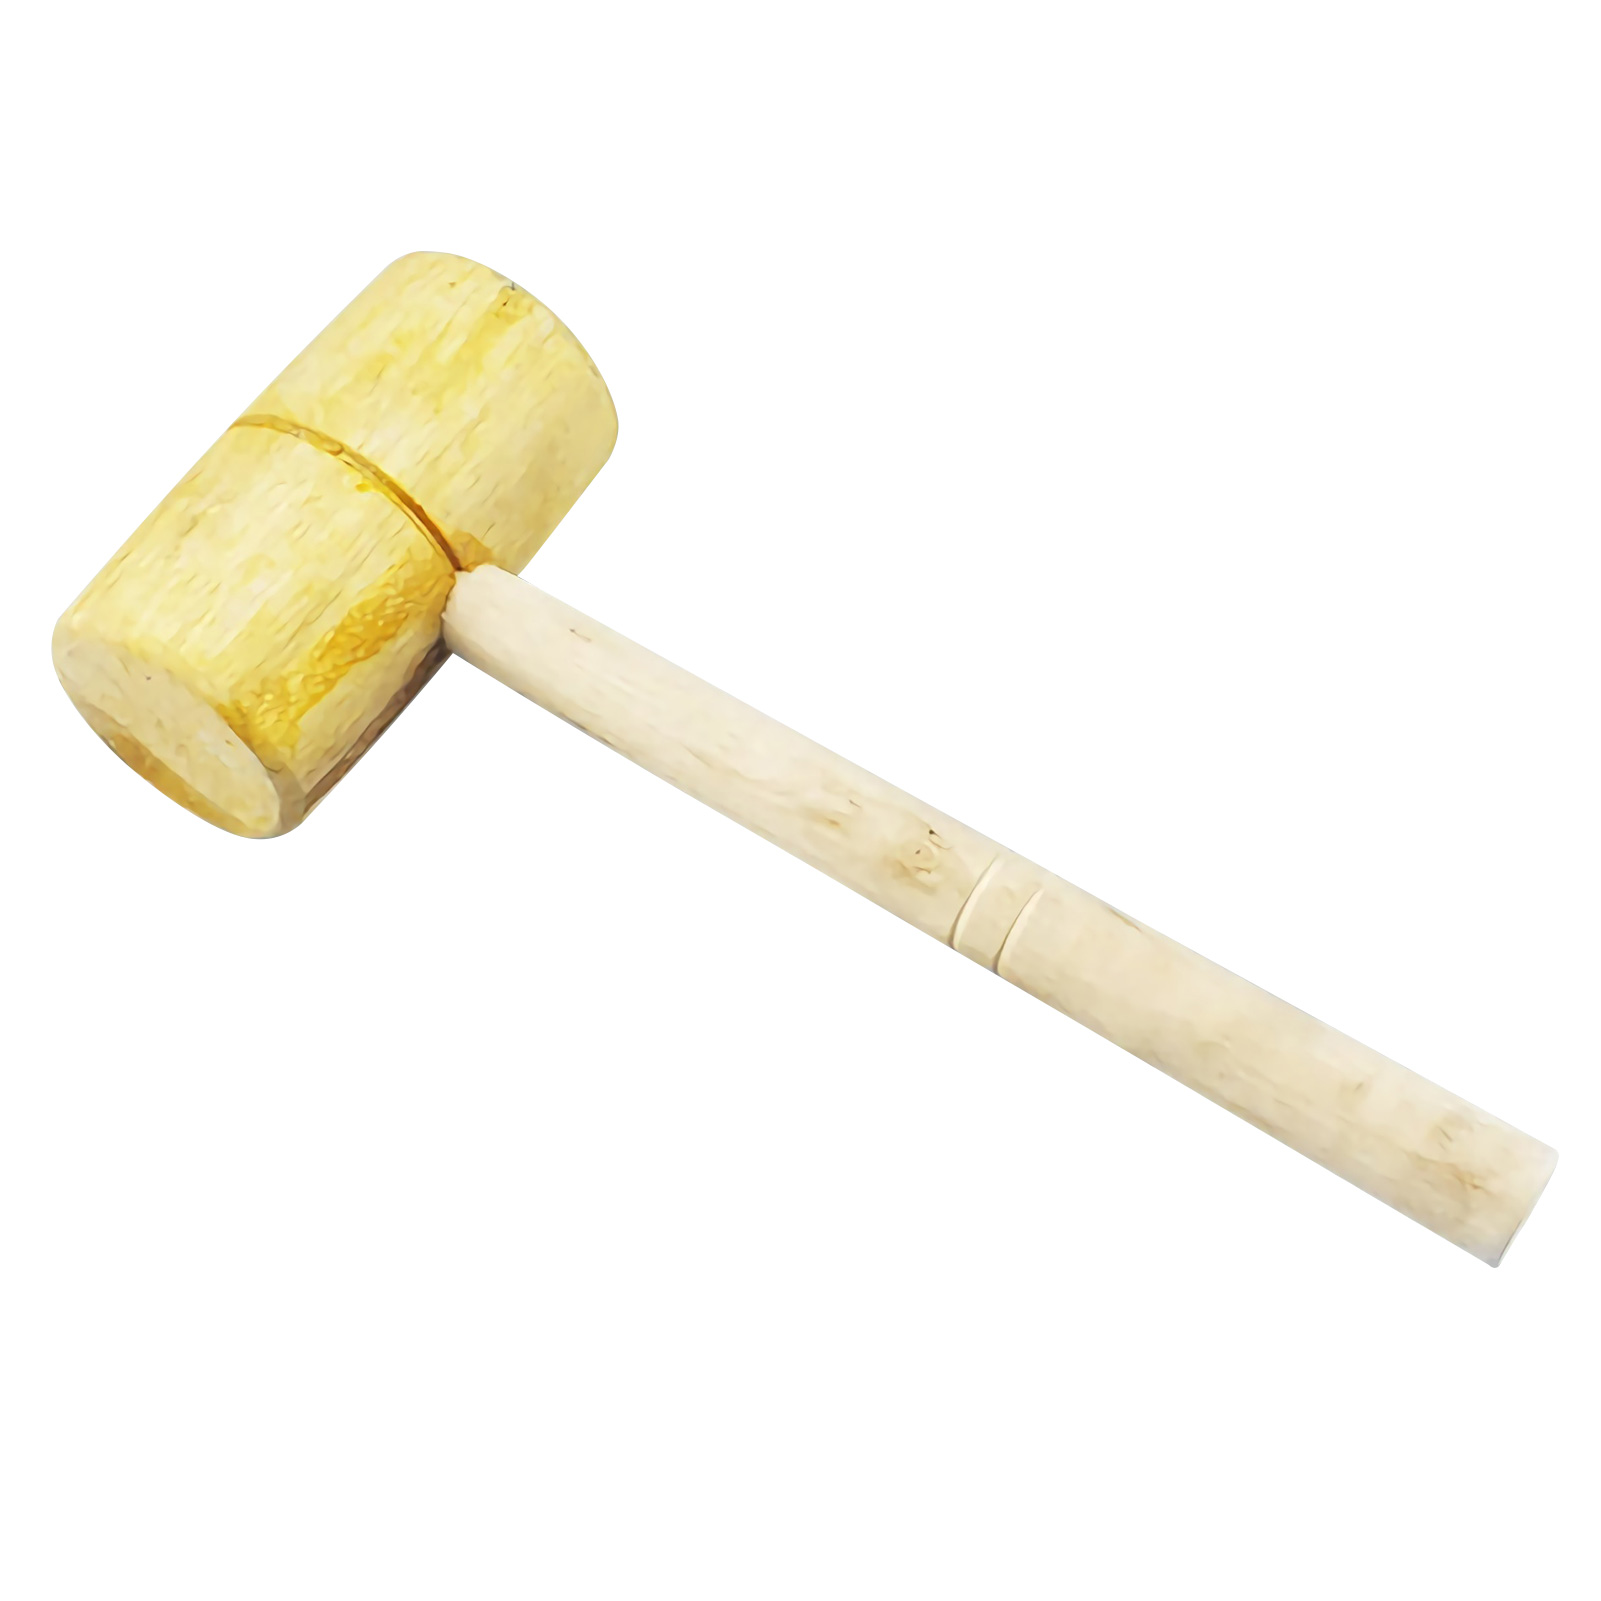 ADAMAS-BETA Lab Natural Wooden Hammer Detachable Solid Wood Hammer Commonly for Laboratory/Daliy/Workhouse Knocking Tools